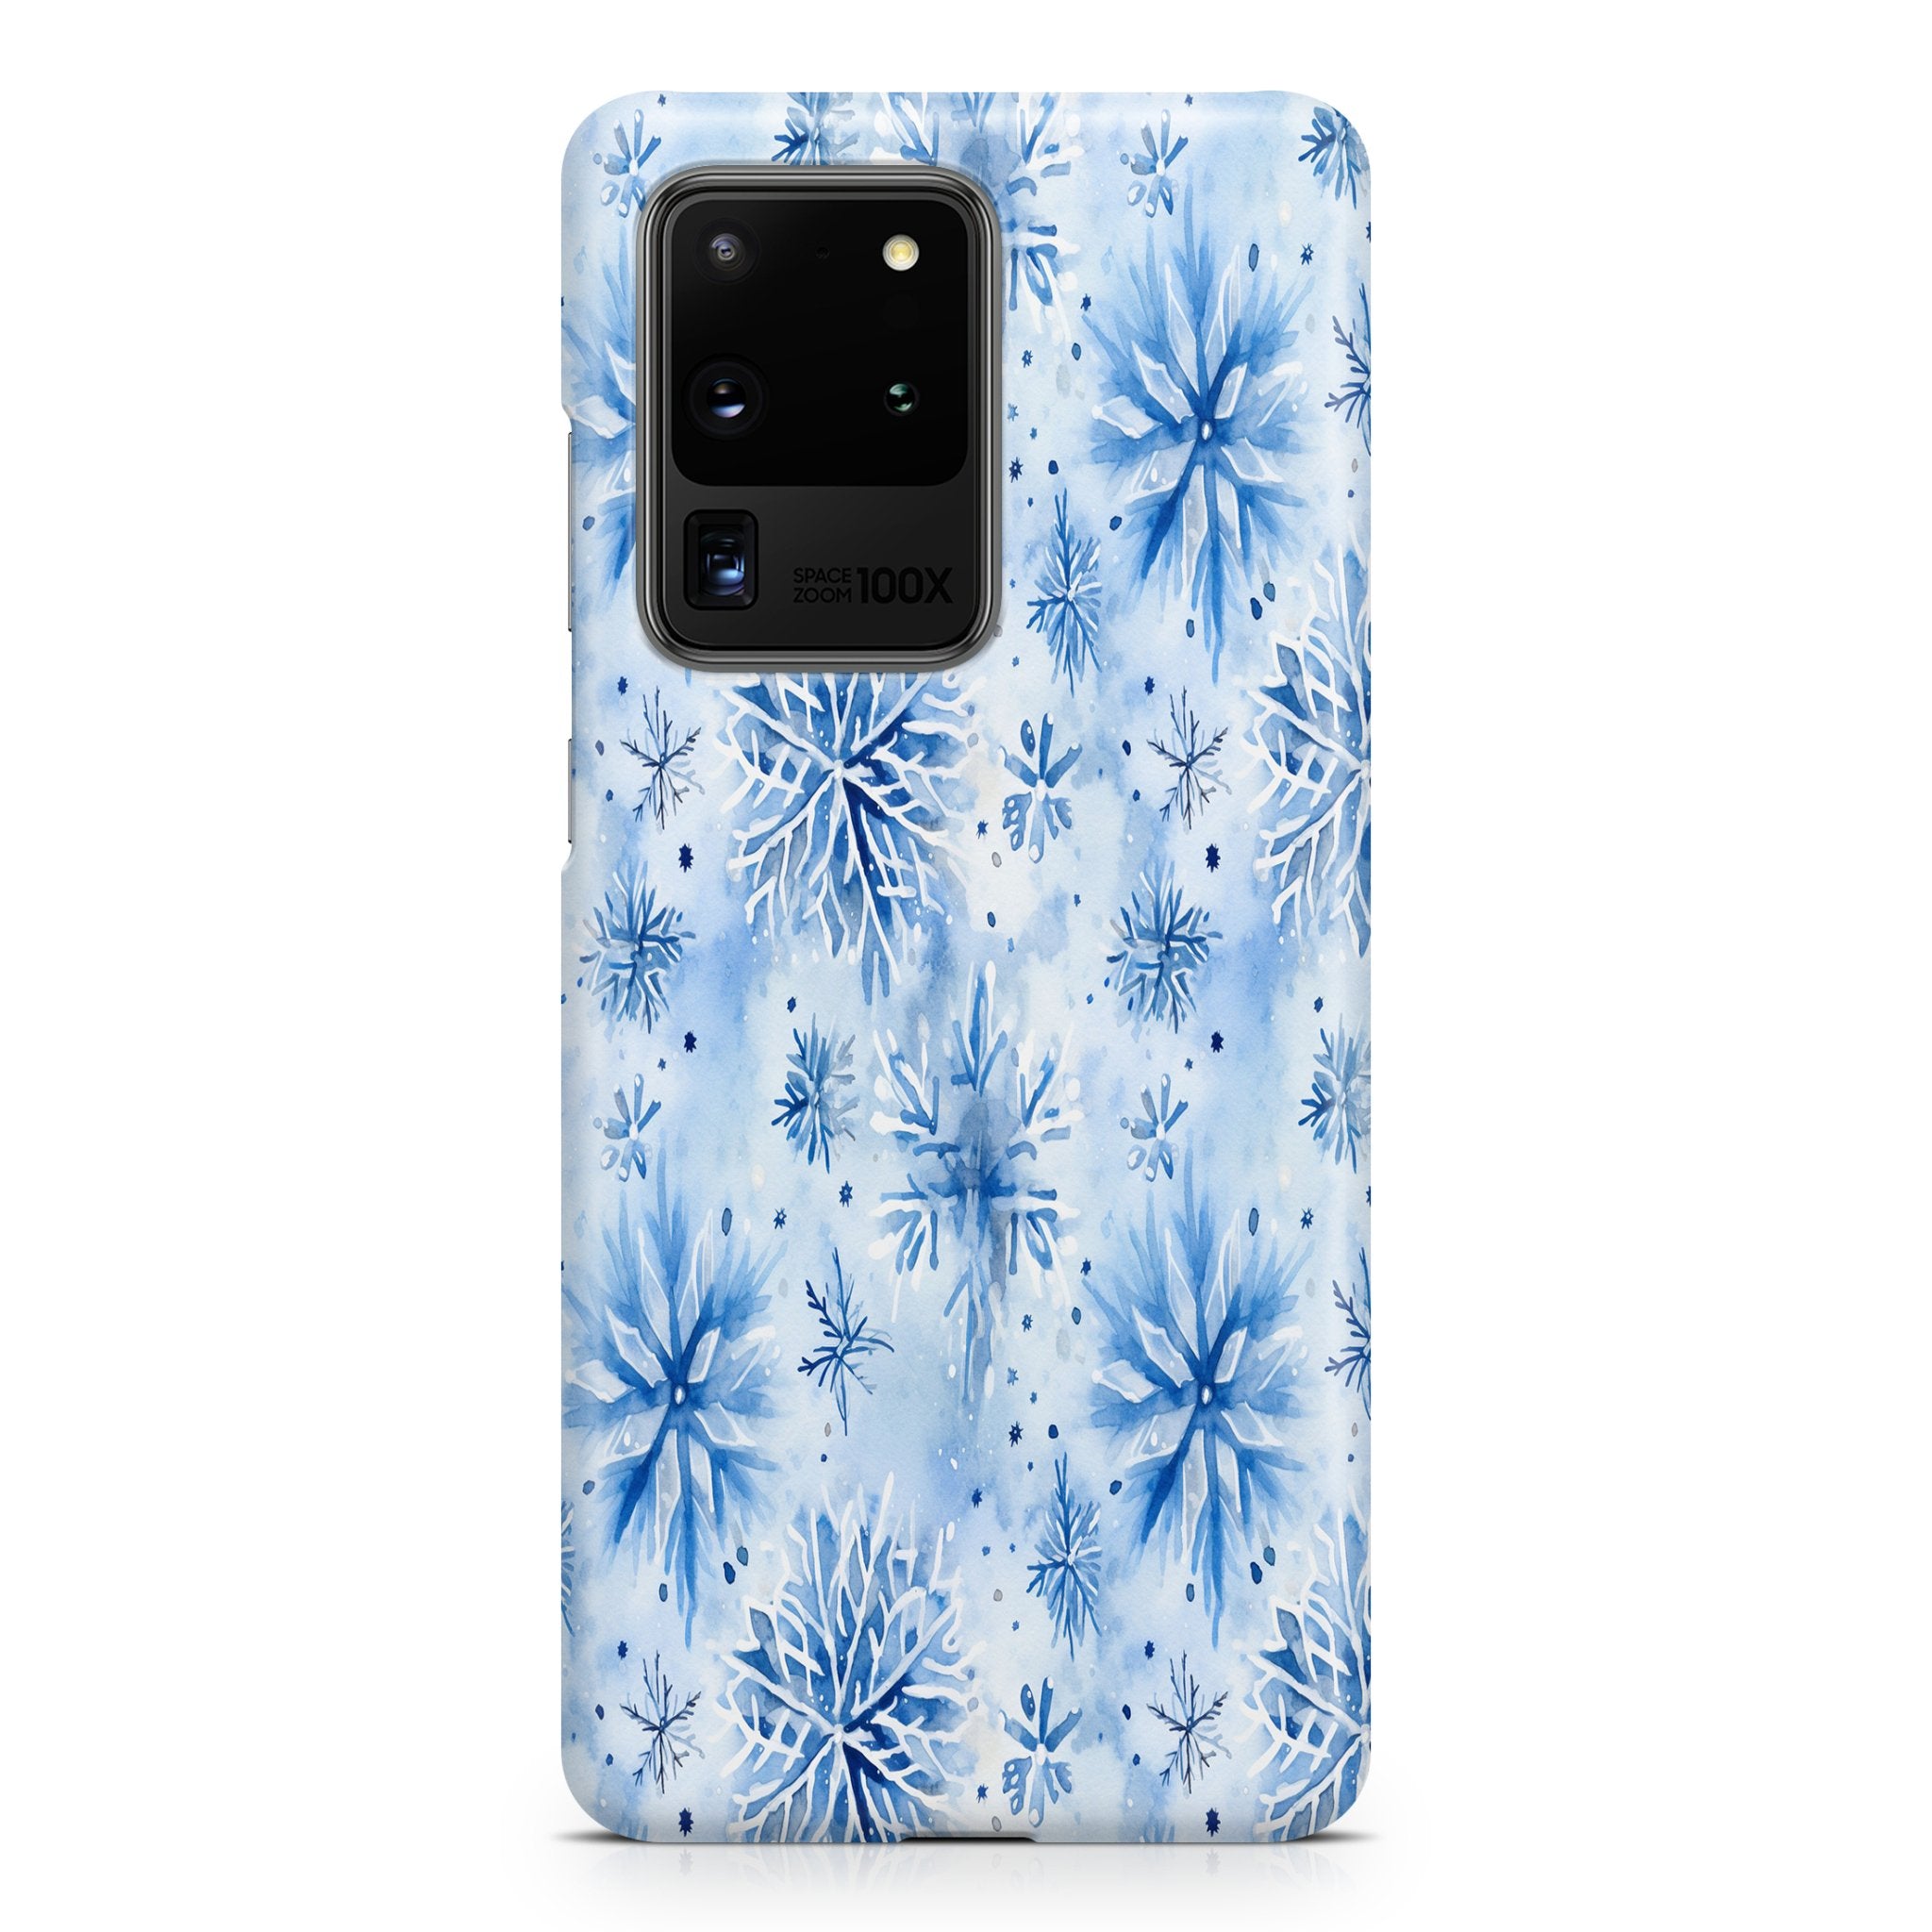 Serenity Snowflake - Samsung phone case designs by CaseSwagger